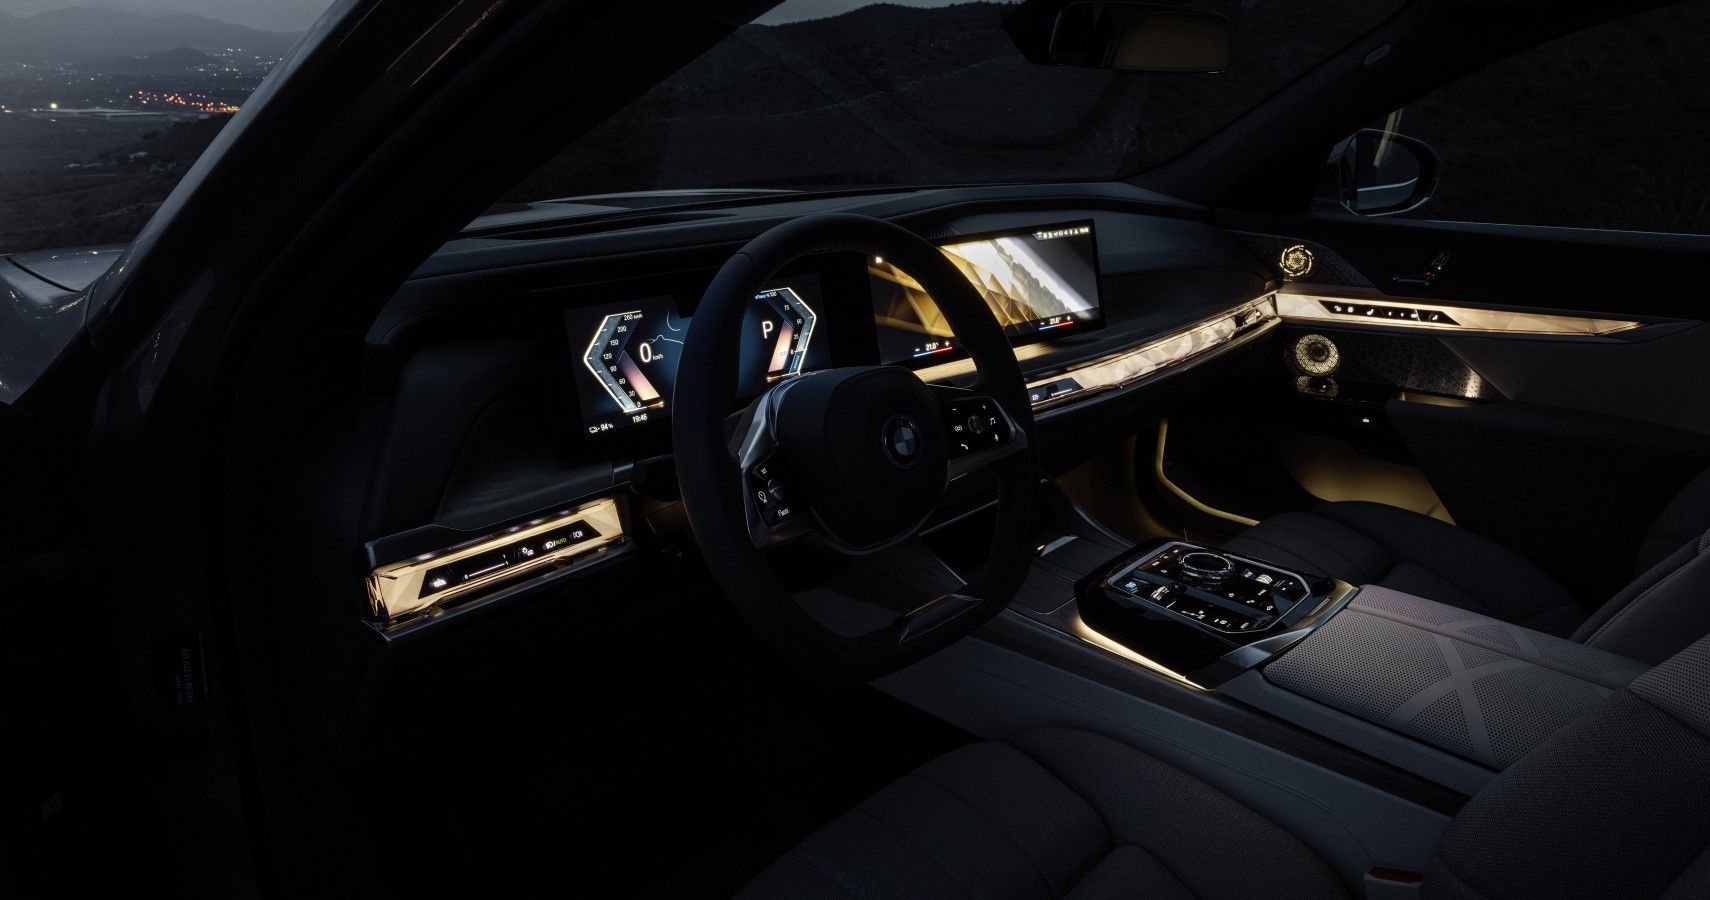 2023 BMW i7 interior with ambient lighting at night